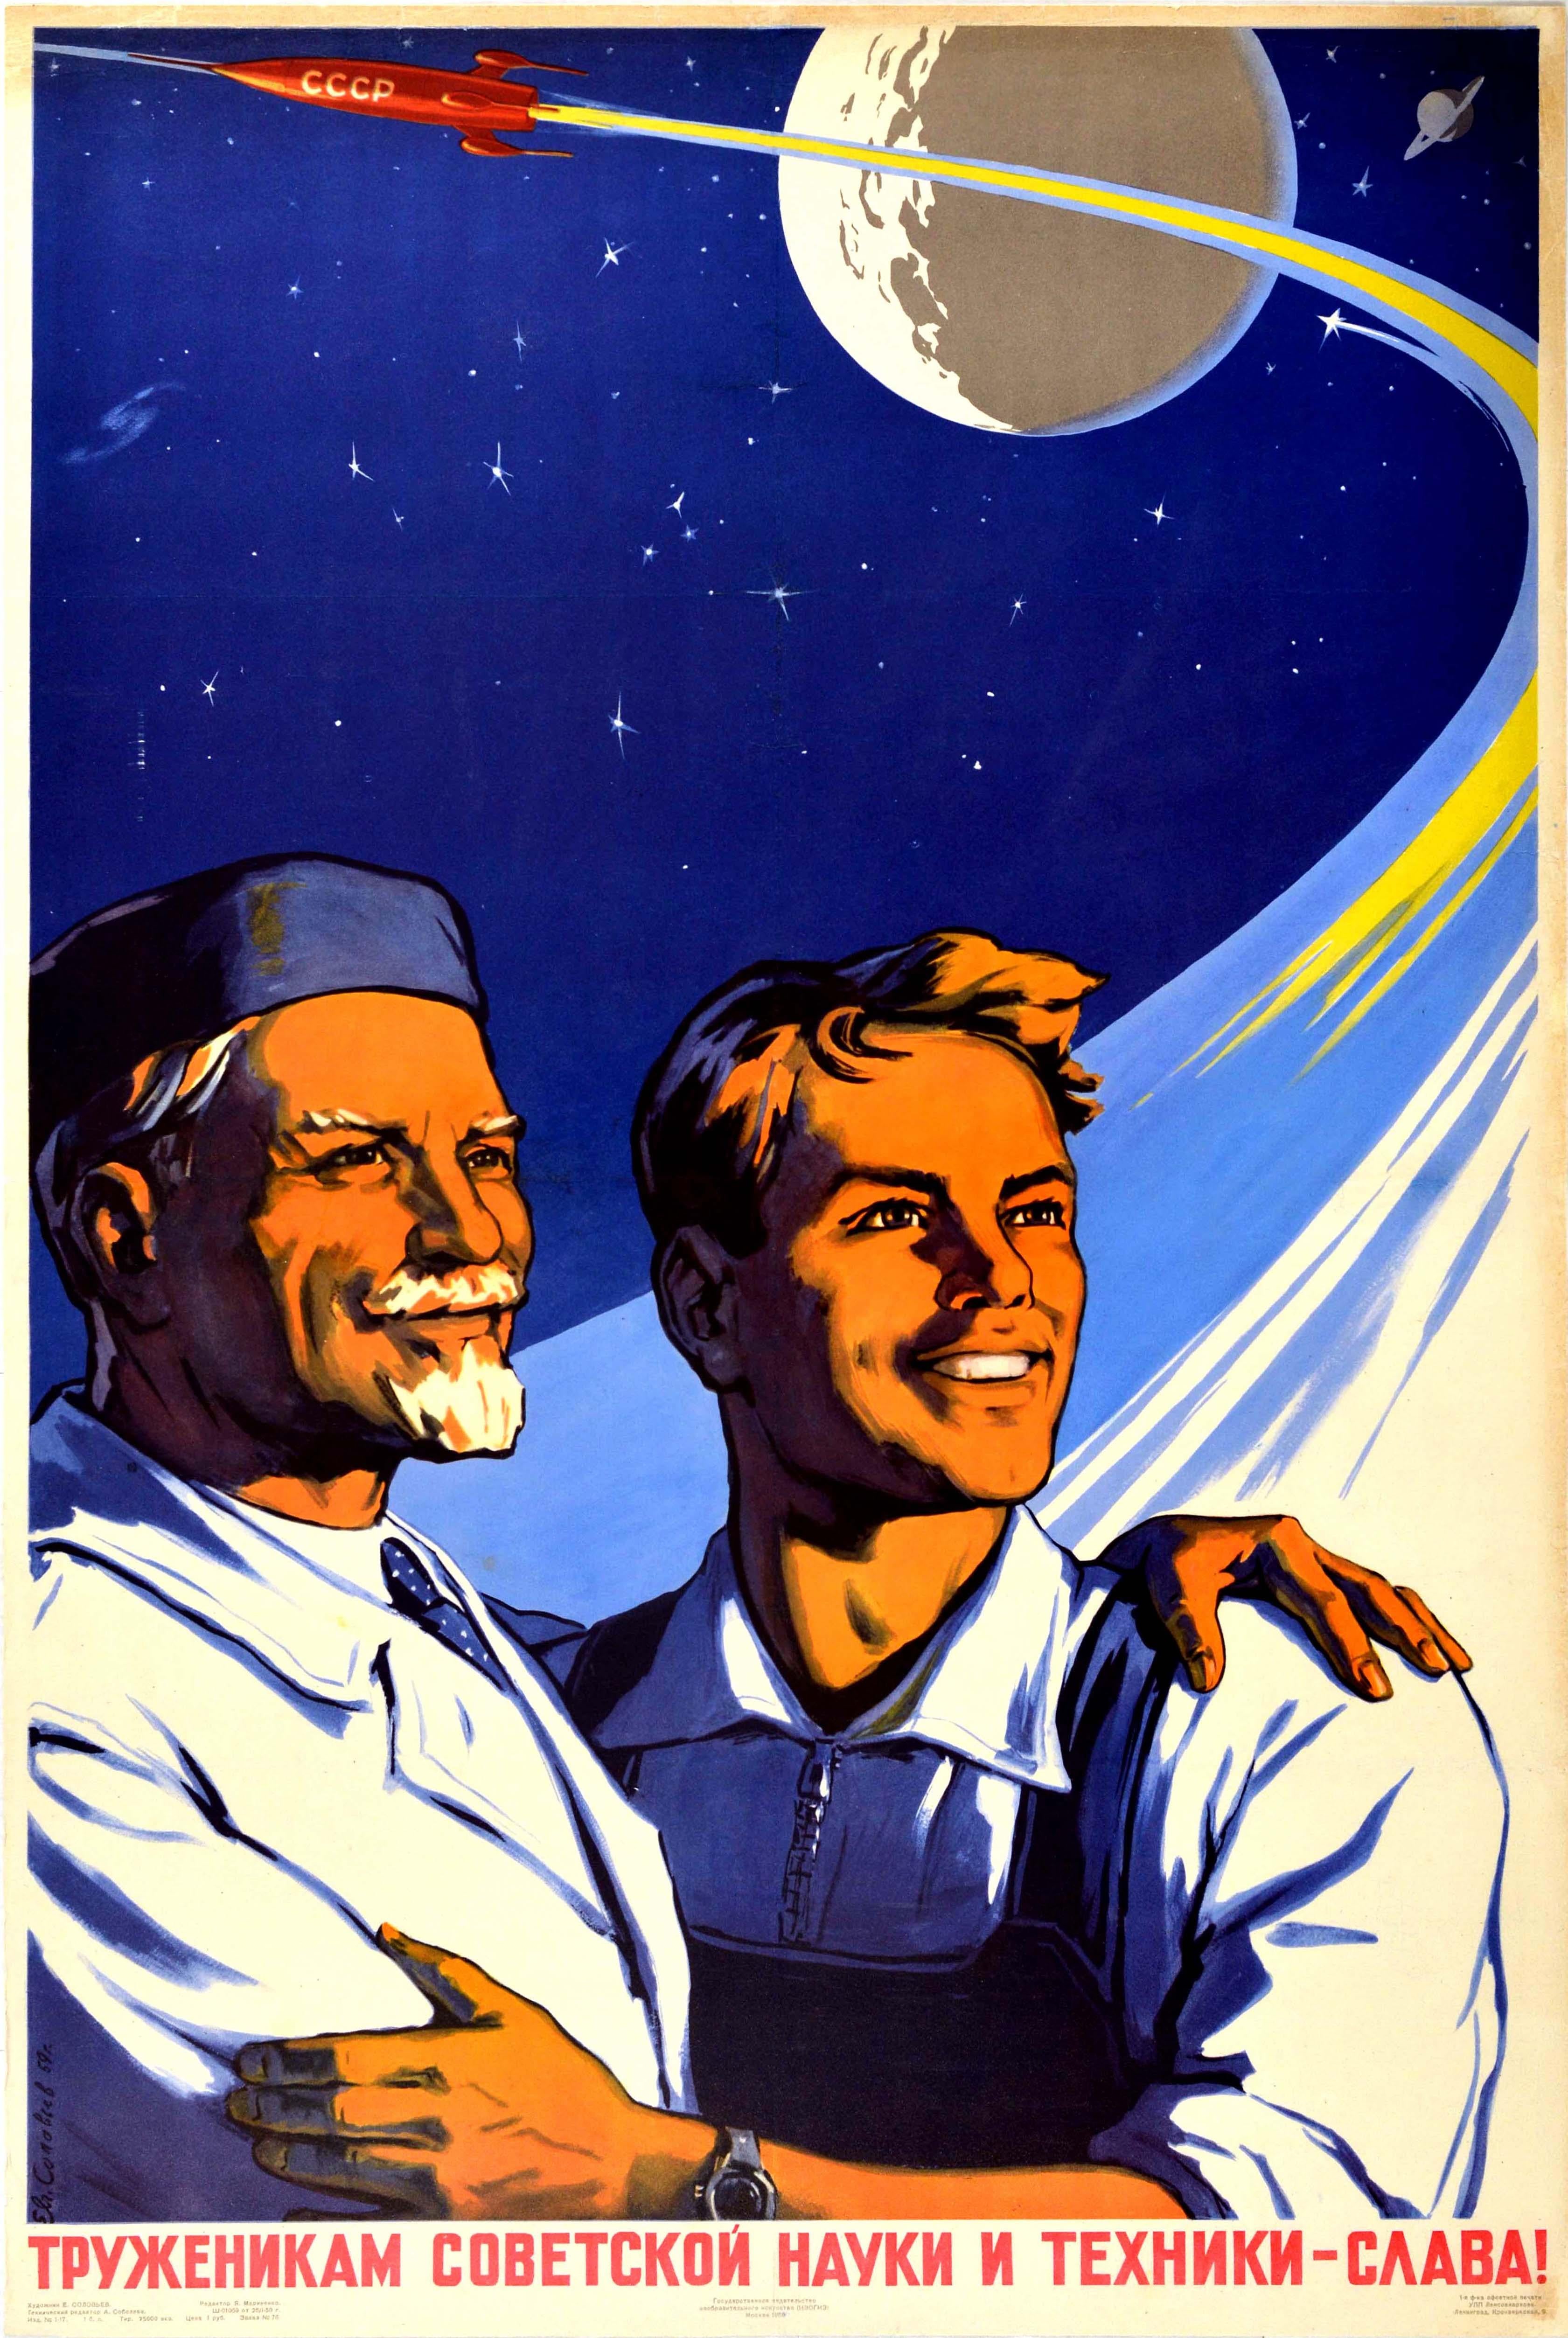 Original Vintage Poster Glory To Soviet Science & Technology Workers USSR Space